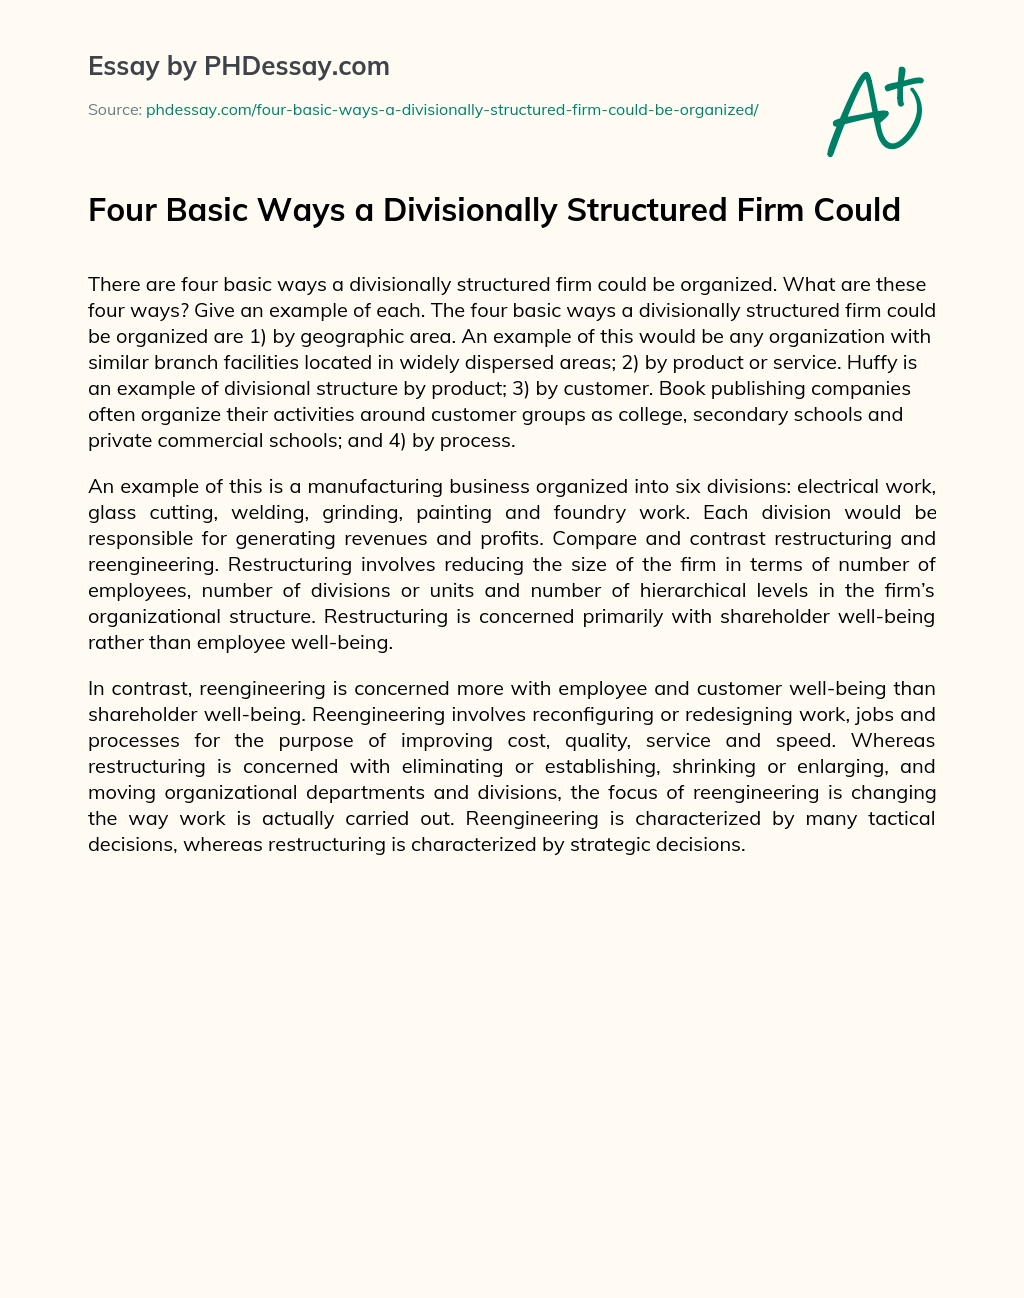 Four Basic Ways a Divisionally Structured Firm Could essay